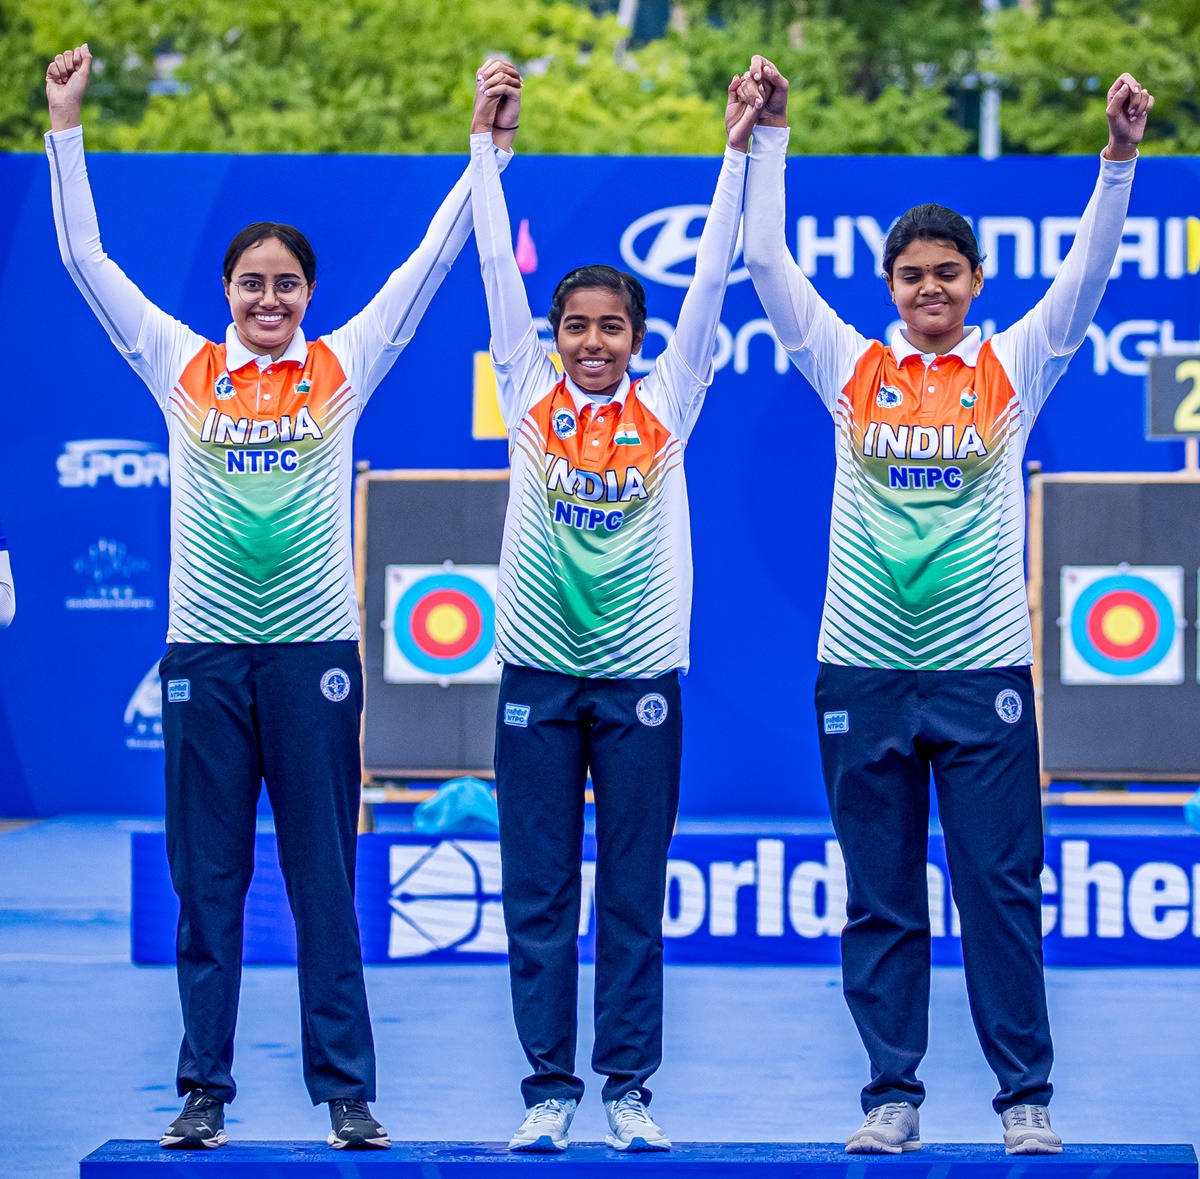 The world No. 1 Indian compound women's archery team Jyothi Surekha Vennam, Parneet Kaur and Aditi Swami grabbed their third successive Archery World Cup gold medal, beating Turkey in the final in Yecheon, South Korea, on Saturday.